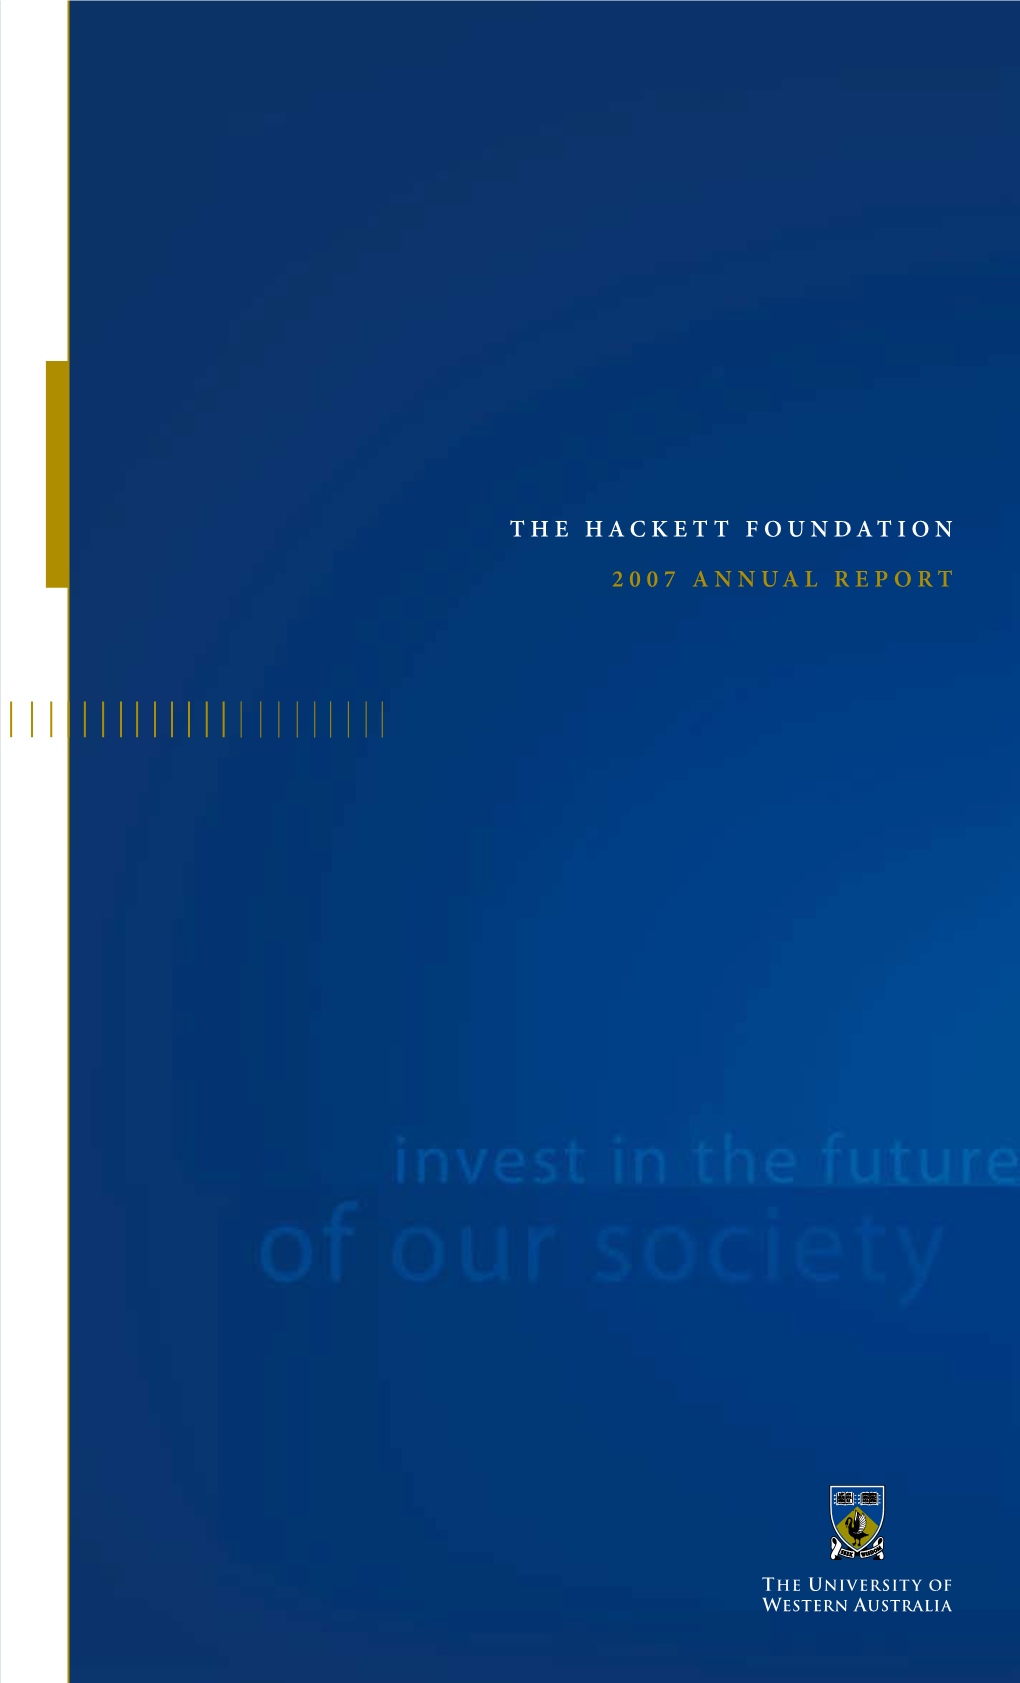 The Hackett Foundation 2007 Annual Report